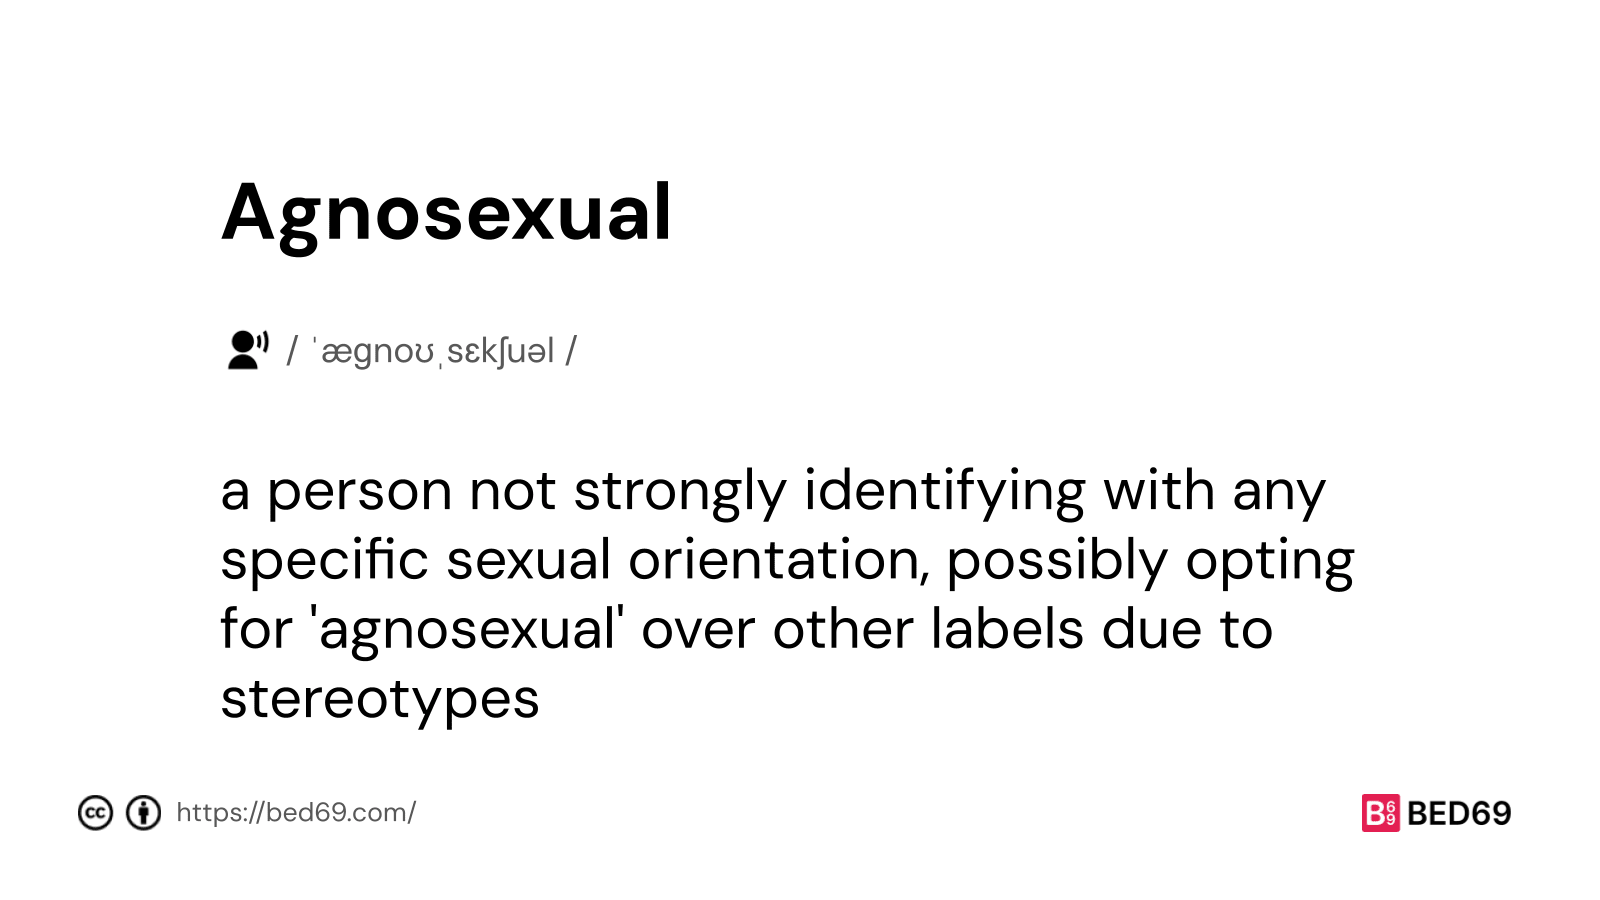 Agnosexual - Word Definition